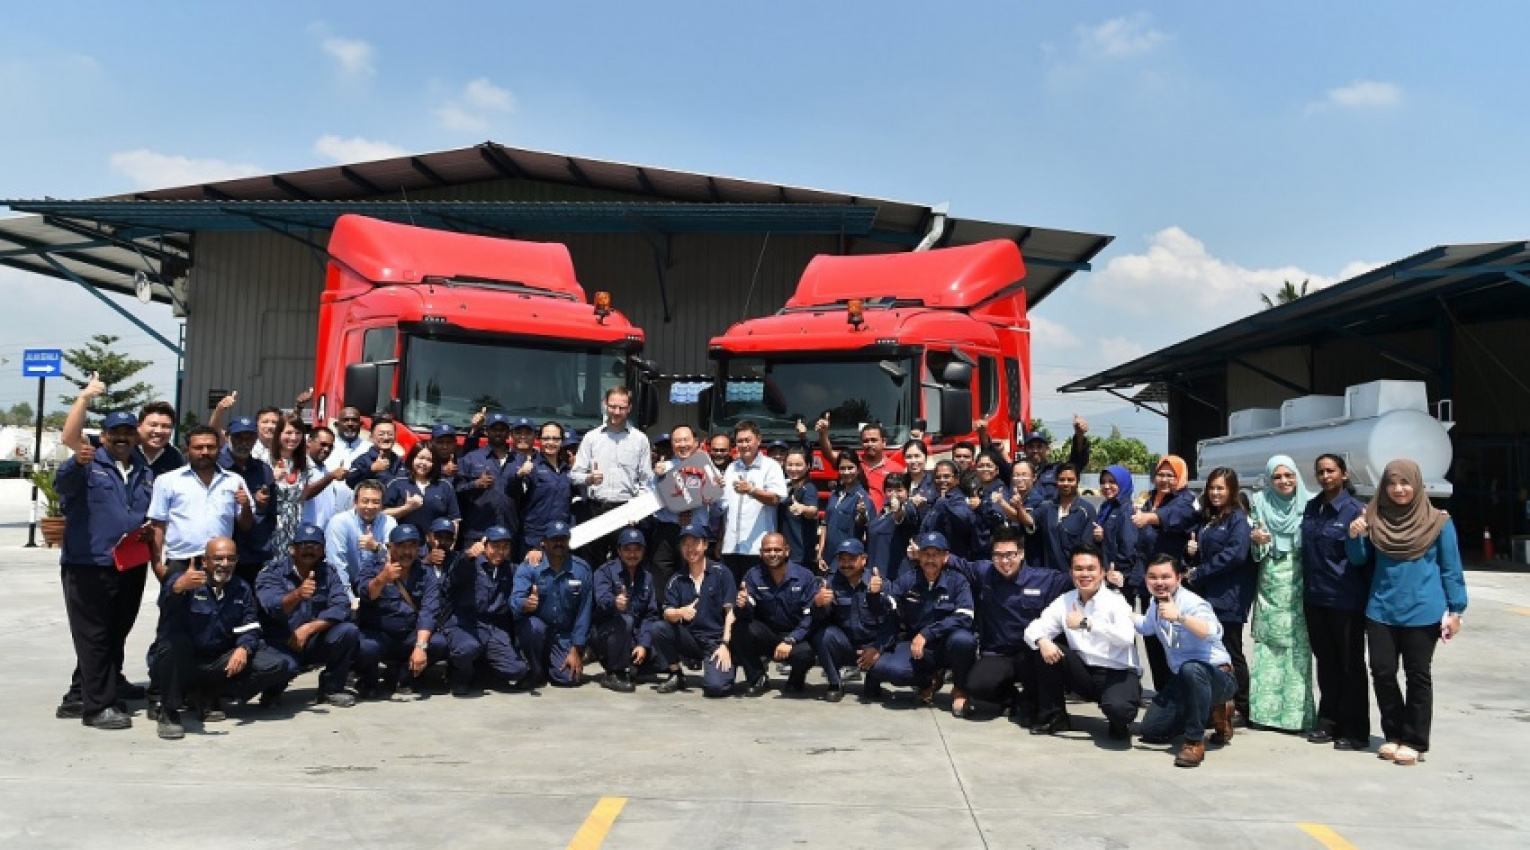 autos, car brands, cars, scania, company chooses scania trucks for its performance, fuel economy and safety